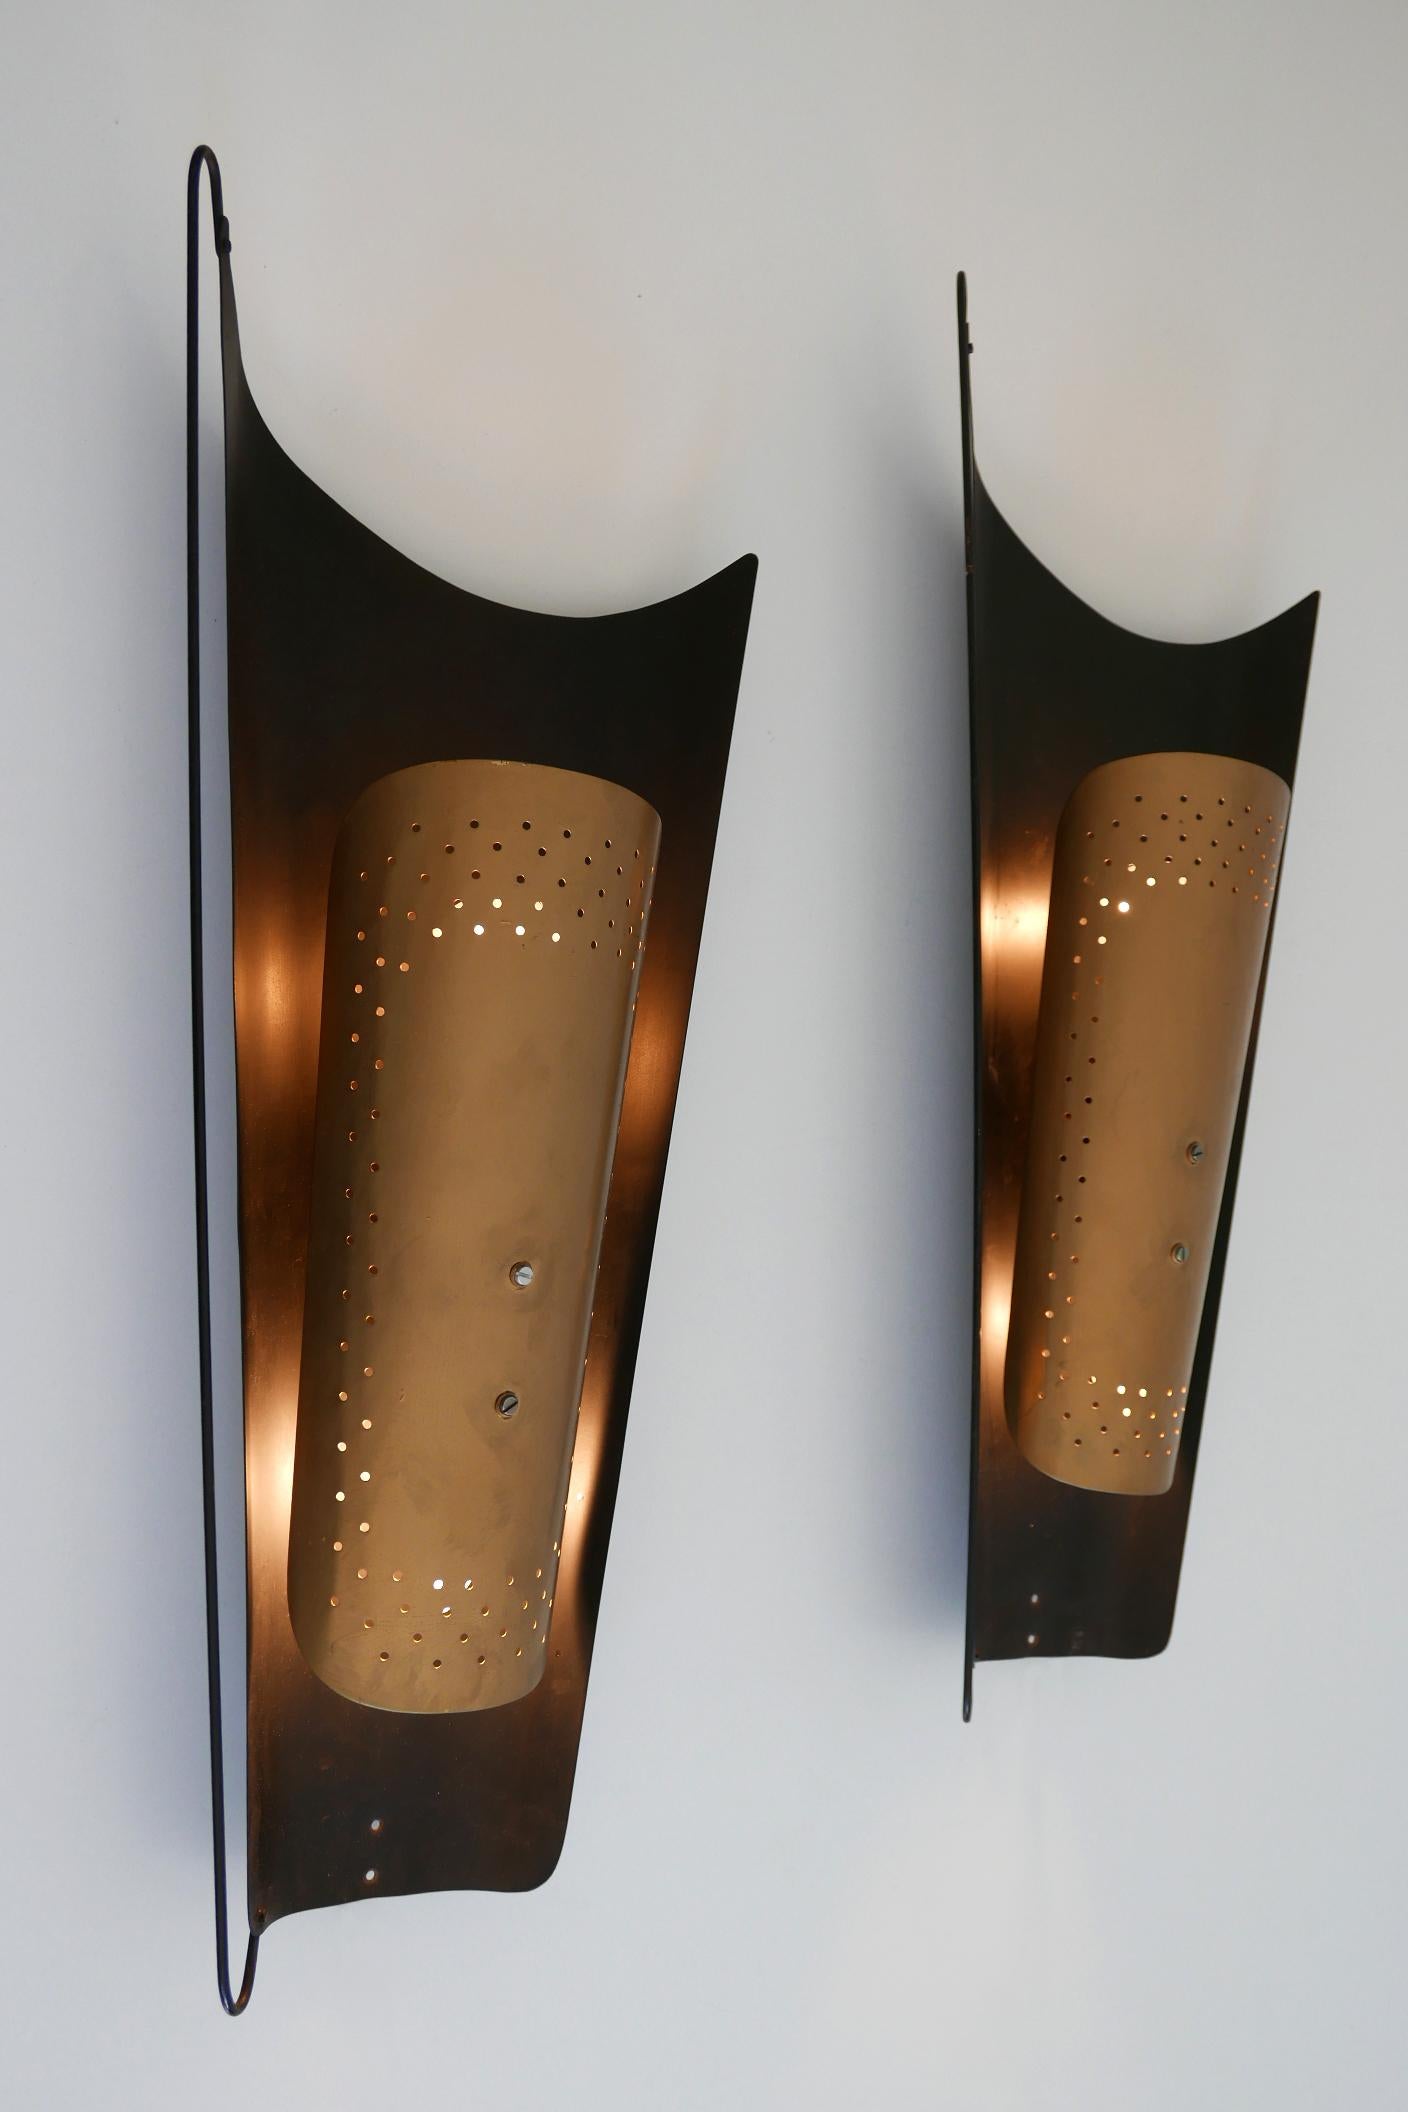 Set of Two Huge Mid-Century Modern Wall Lamps or Sconces, 1950s, Germany For Sale 2